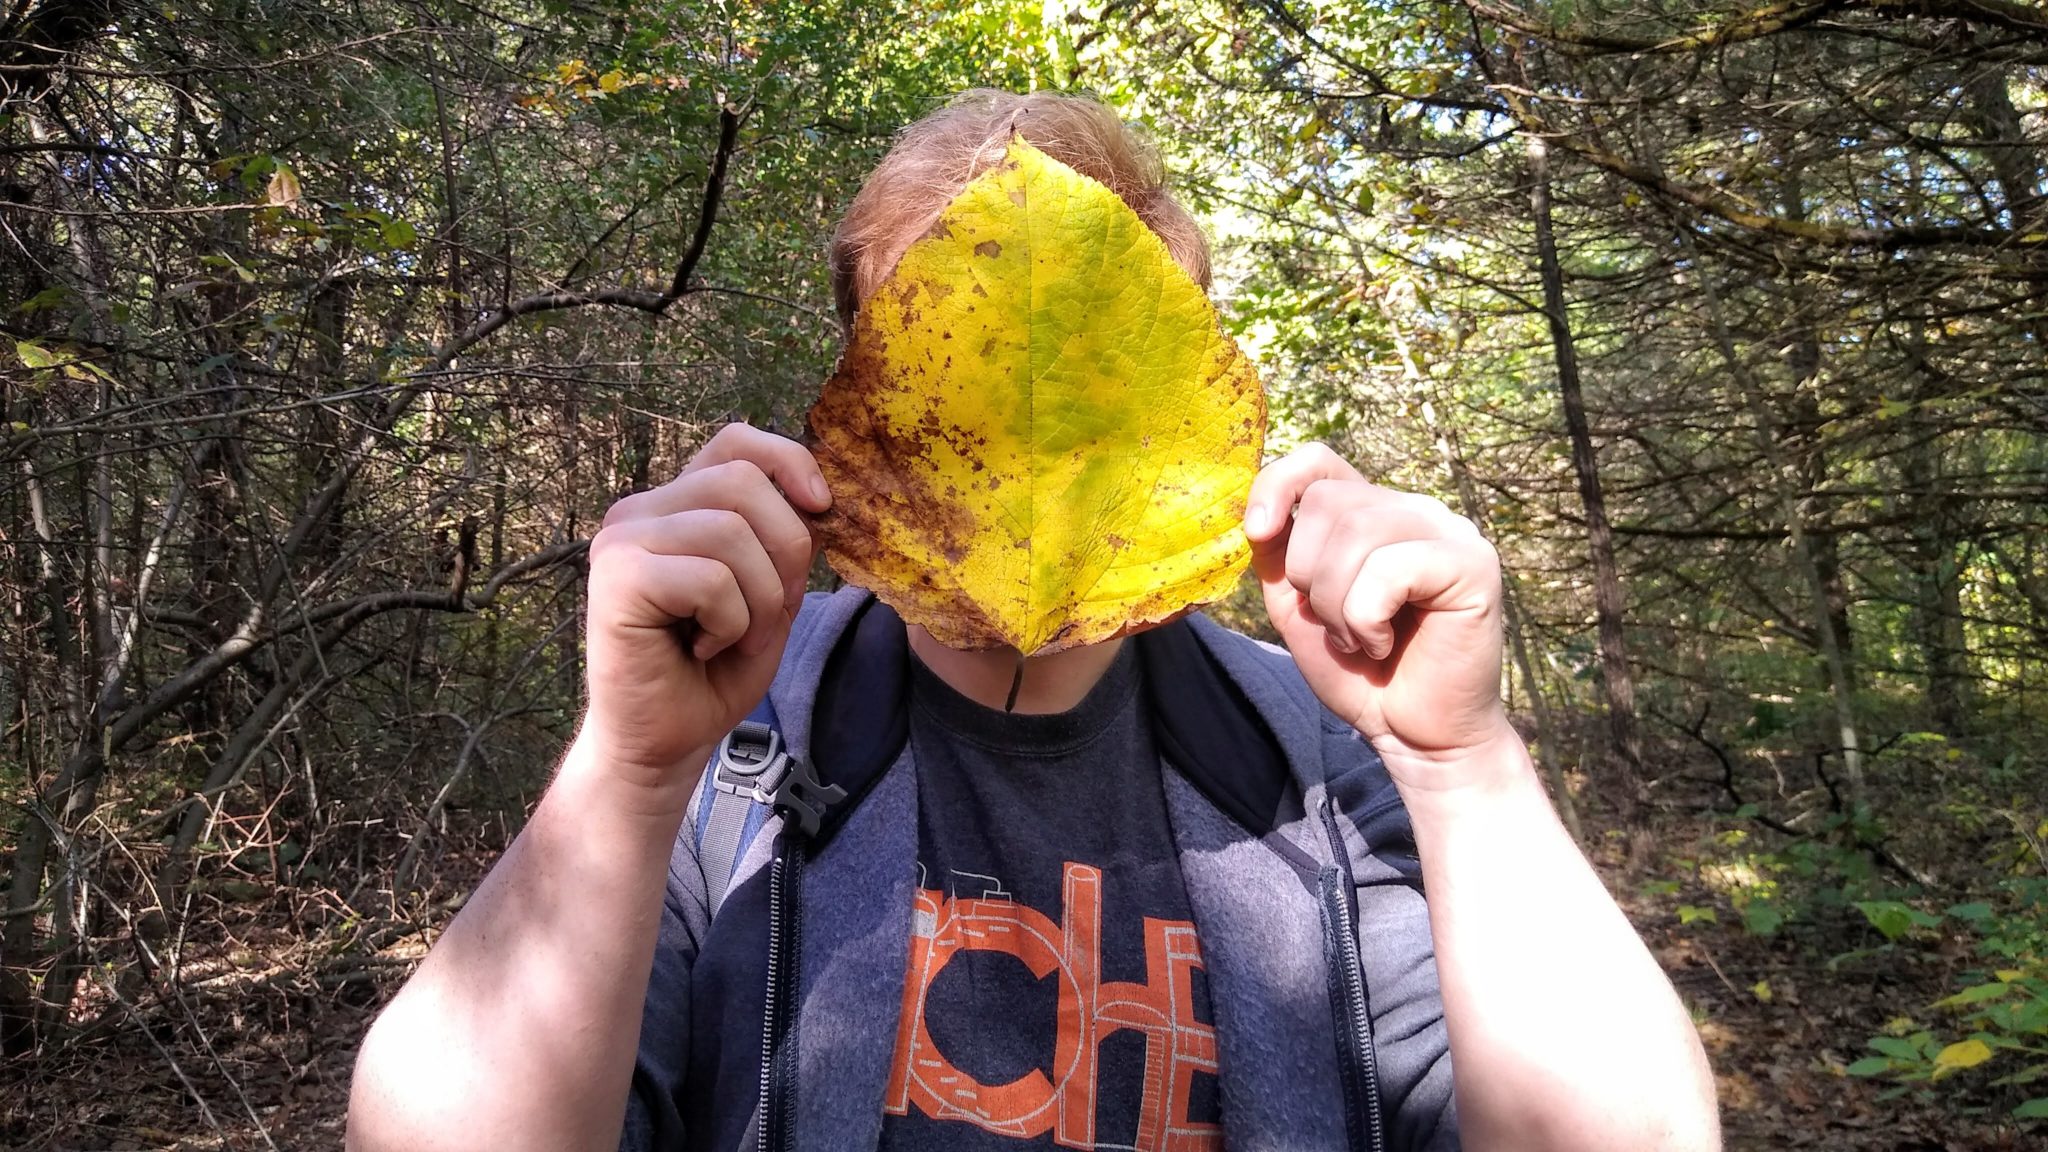 A man wearing a gray shirt and jacket stands in the woods. He is holding up a large yellow leaf, obscuring his face. 